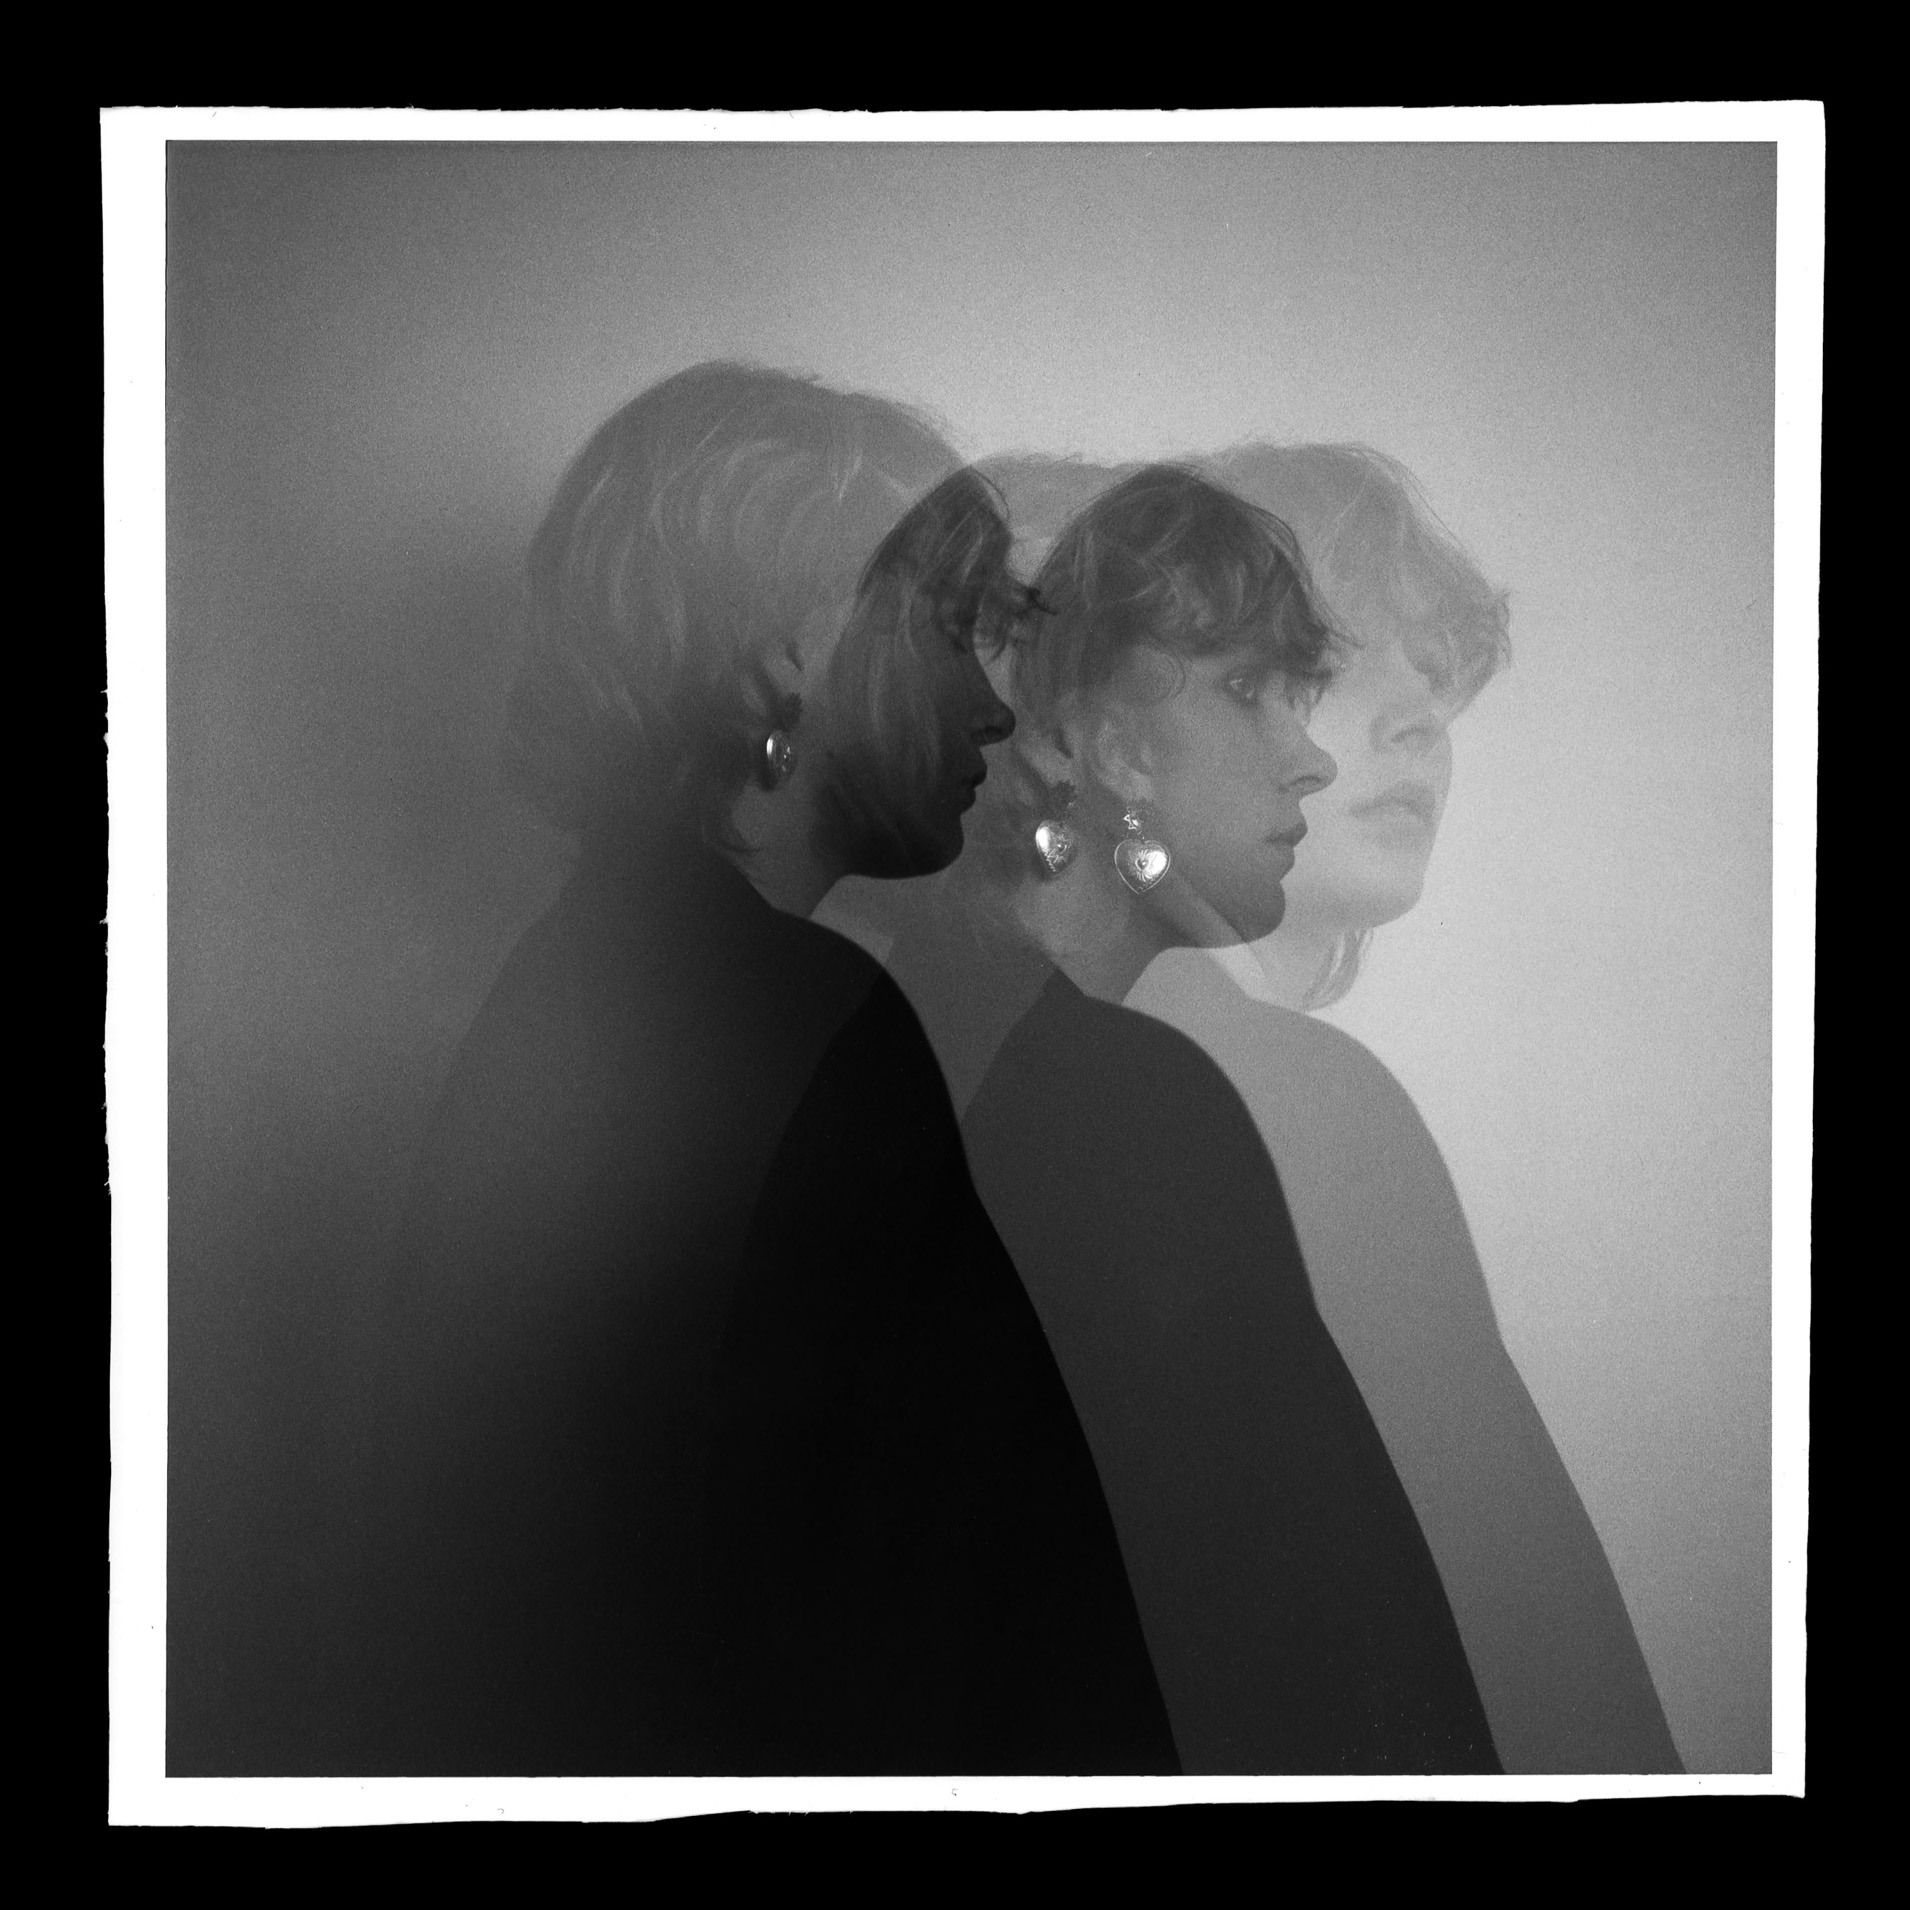 A multiple exposure image shows the same person overlaid on themselves, they are wearing a large earing